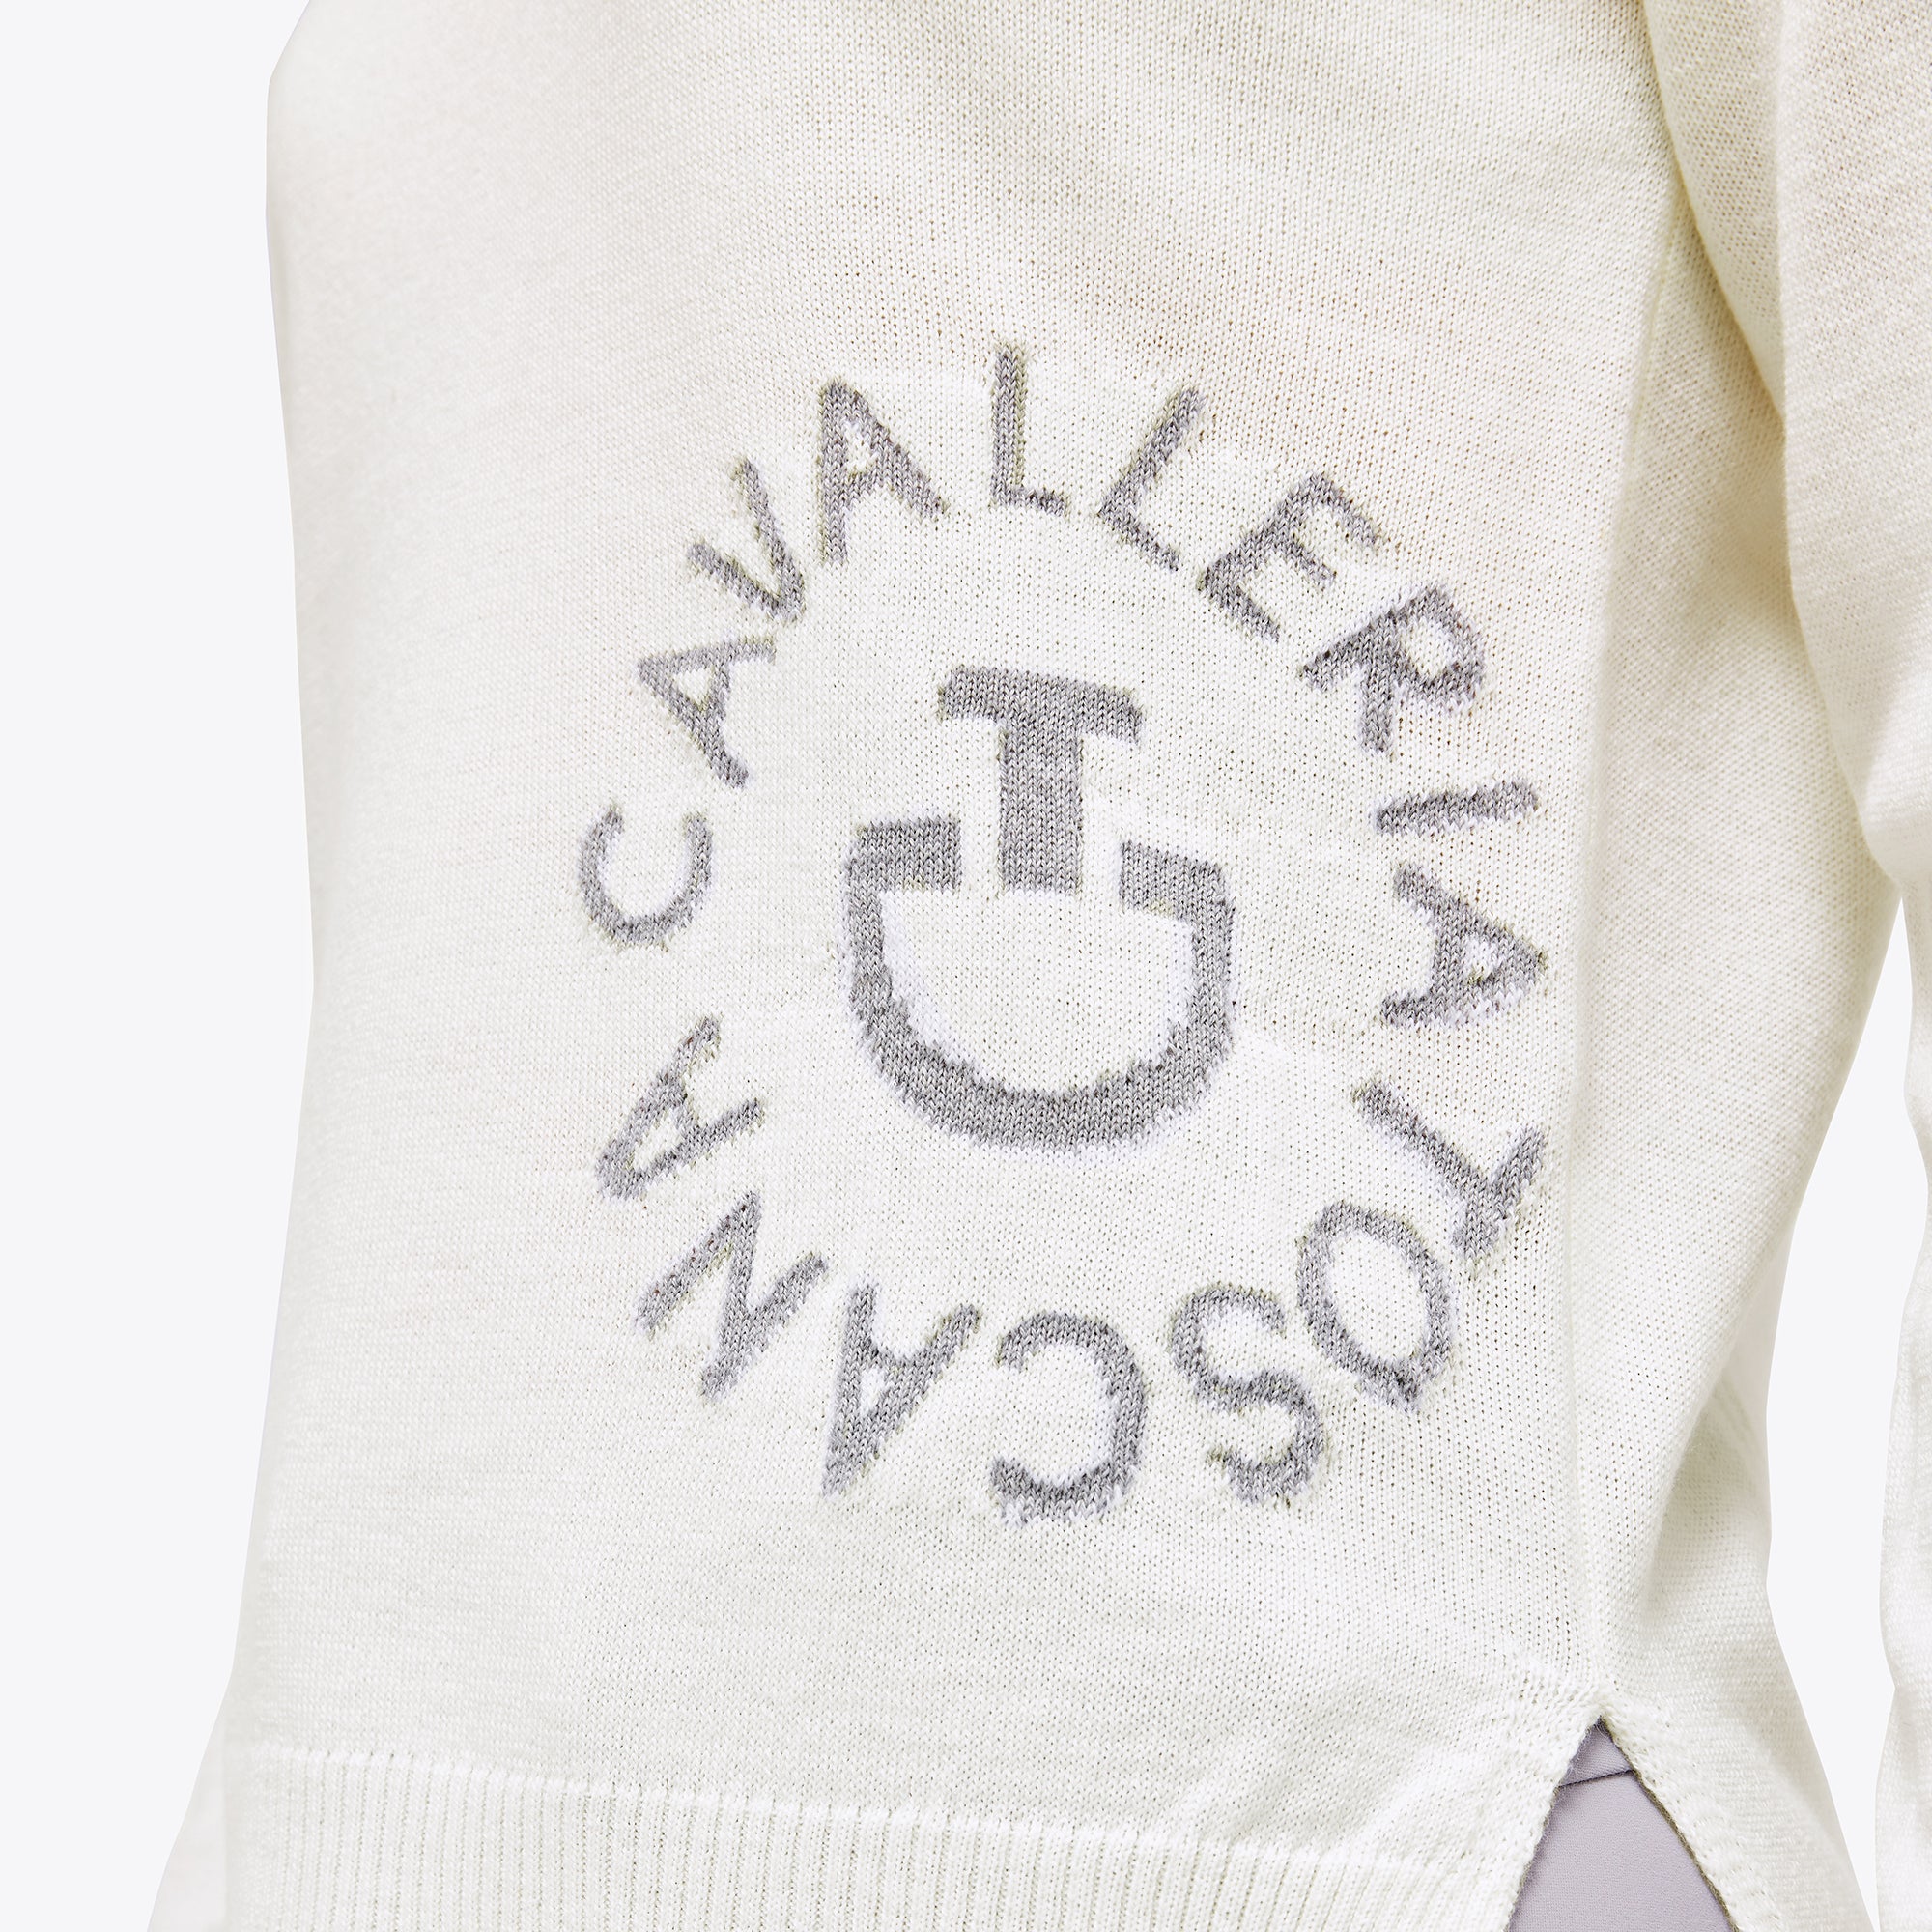 The Cavalleria Toscana Jacquard CT Orbit Marinos Blend Crew Neck Sweater is not only stylish, but also functional. The merino wool is naturally moisture-repellent and keeps you warm and dry even in wet weather. The sweater is also easy to clean and machine washable.